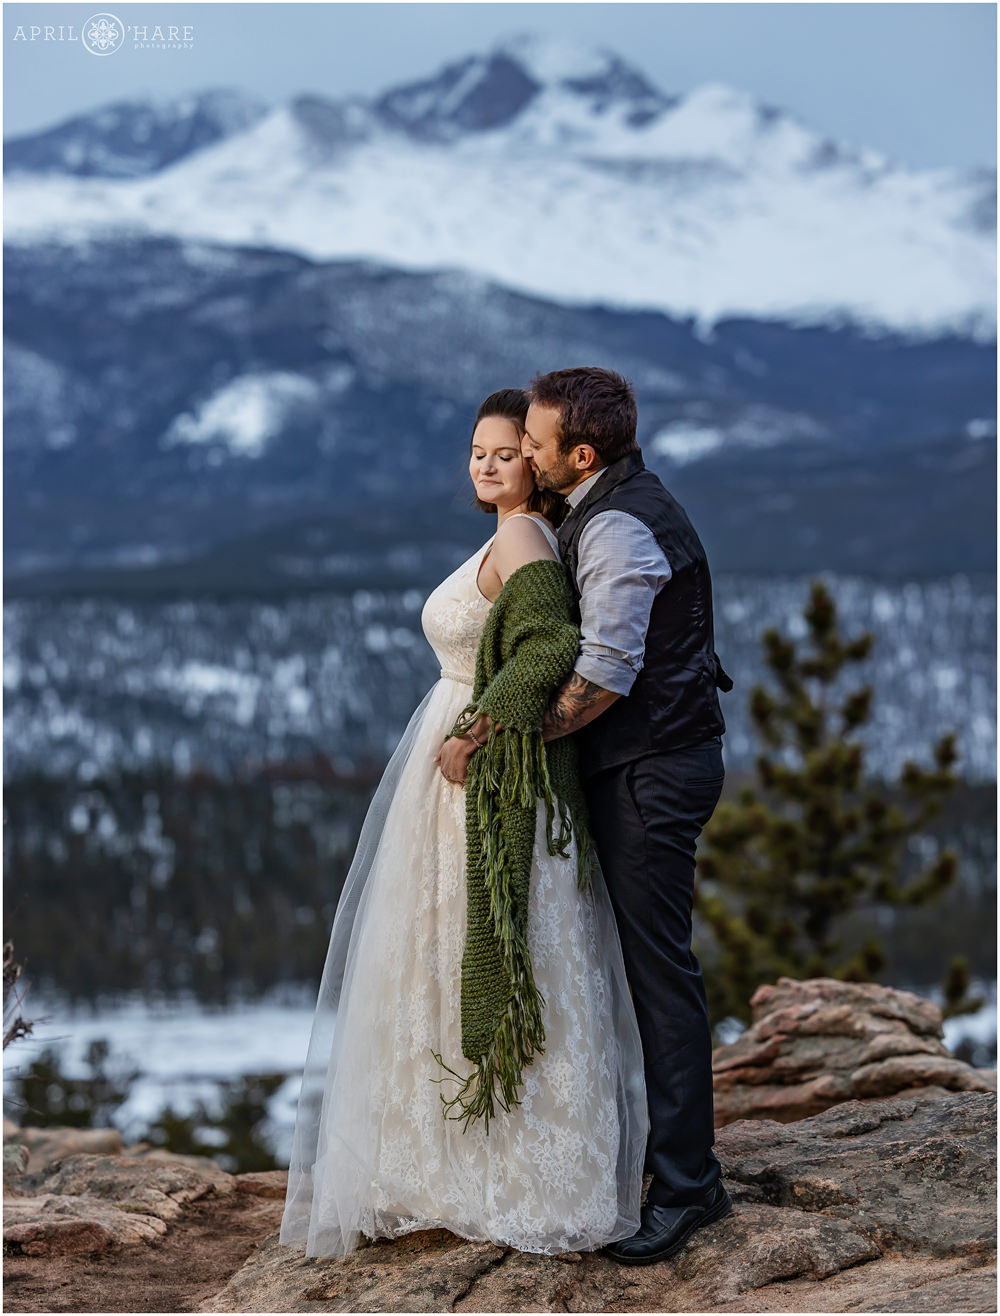 Groom snuggles into his bride as they stand on a rocky outcrop at 3M curve with a pretty blue mountain with lots of snow on it on their Spring Elopement day in Estes Park